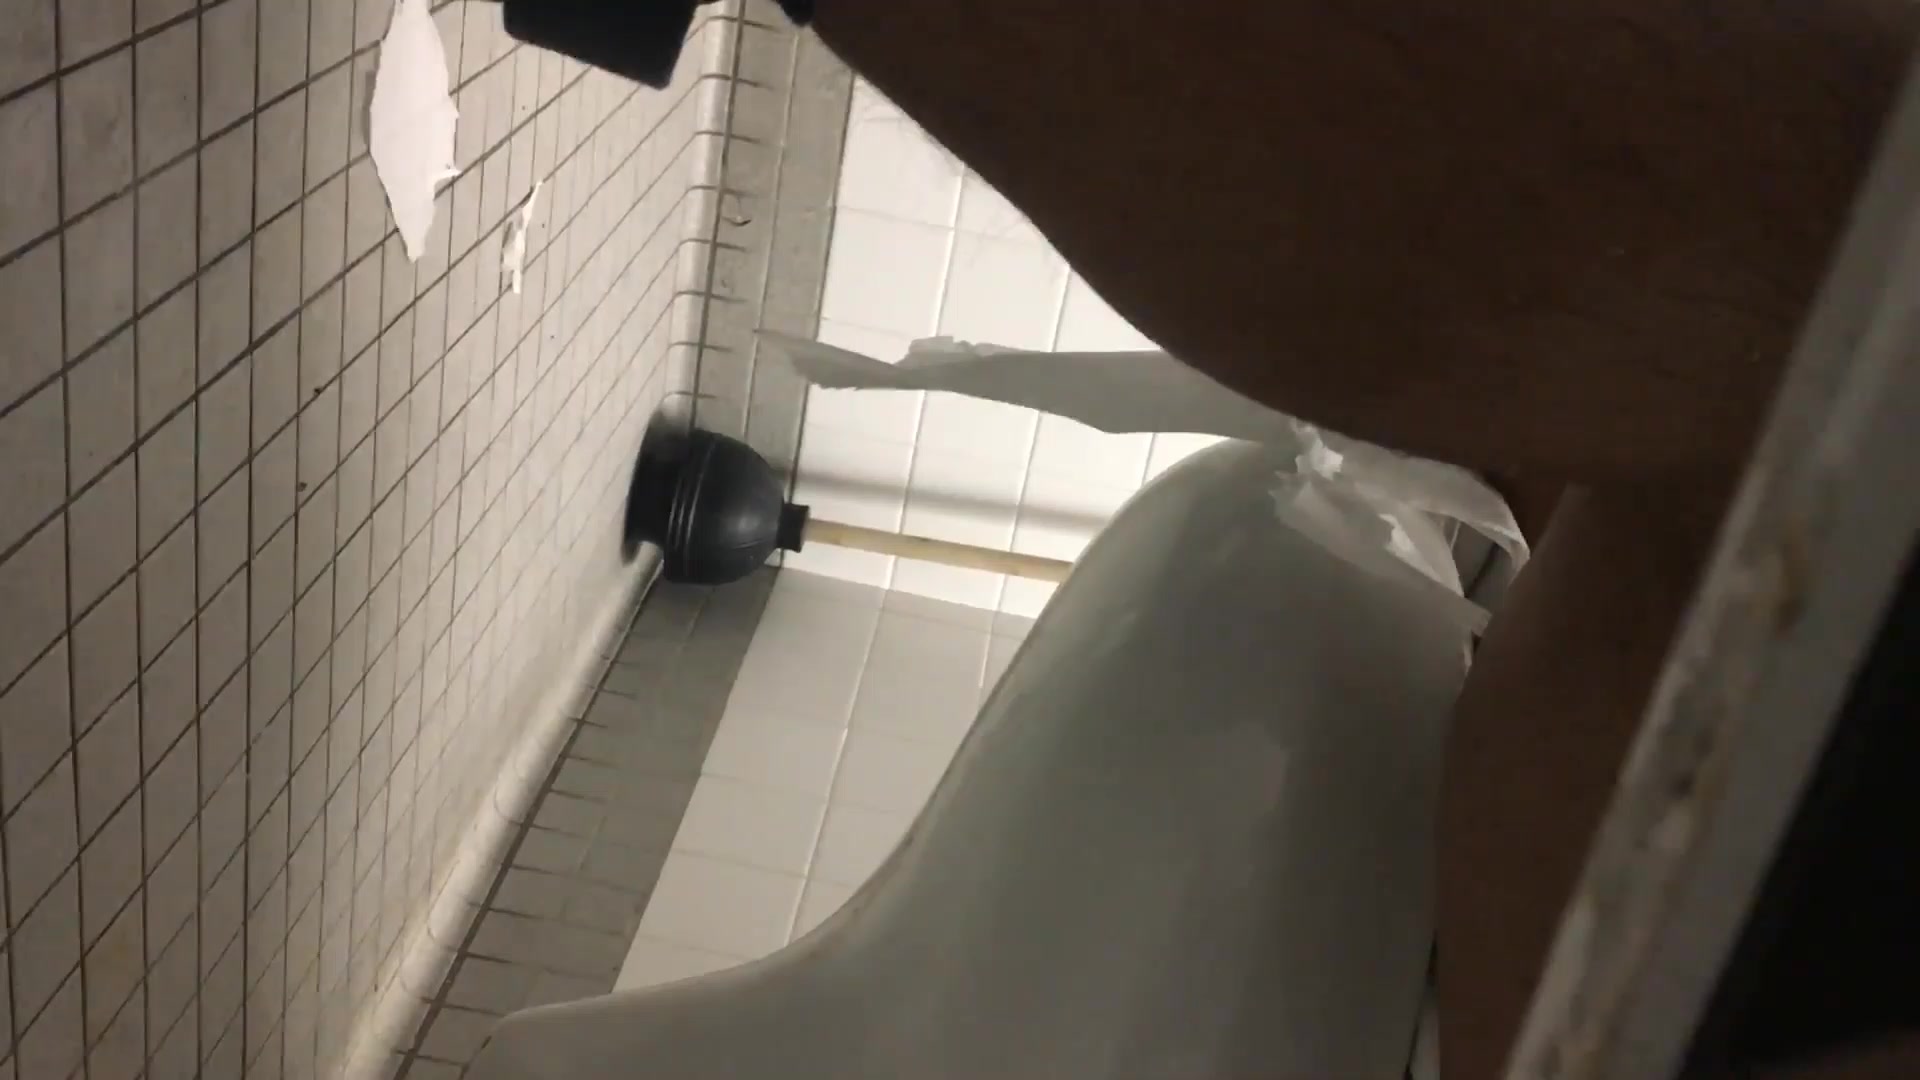 Caught masturbating in library bathroom during finals week